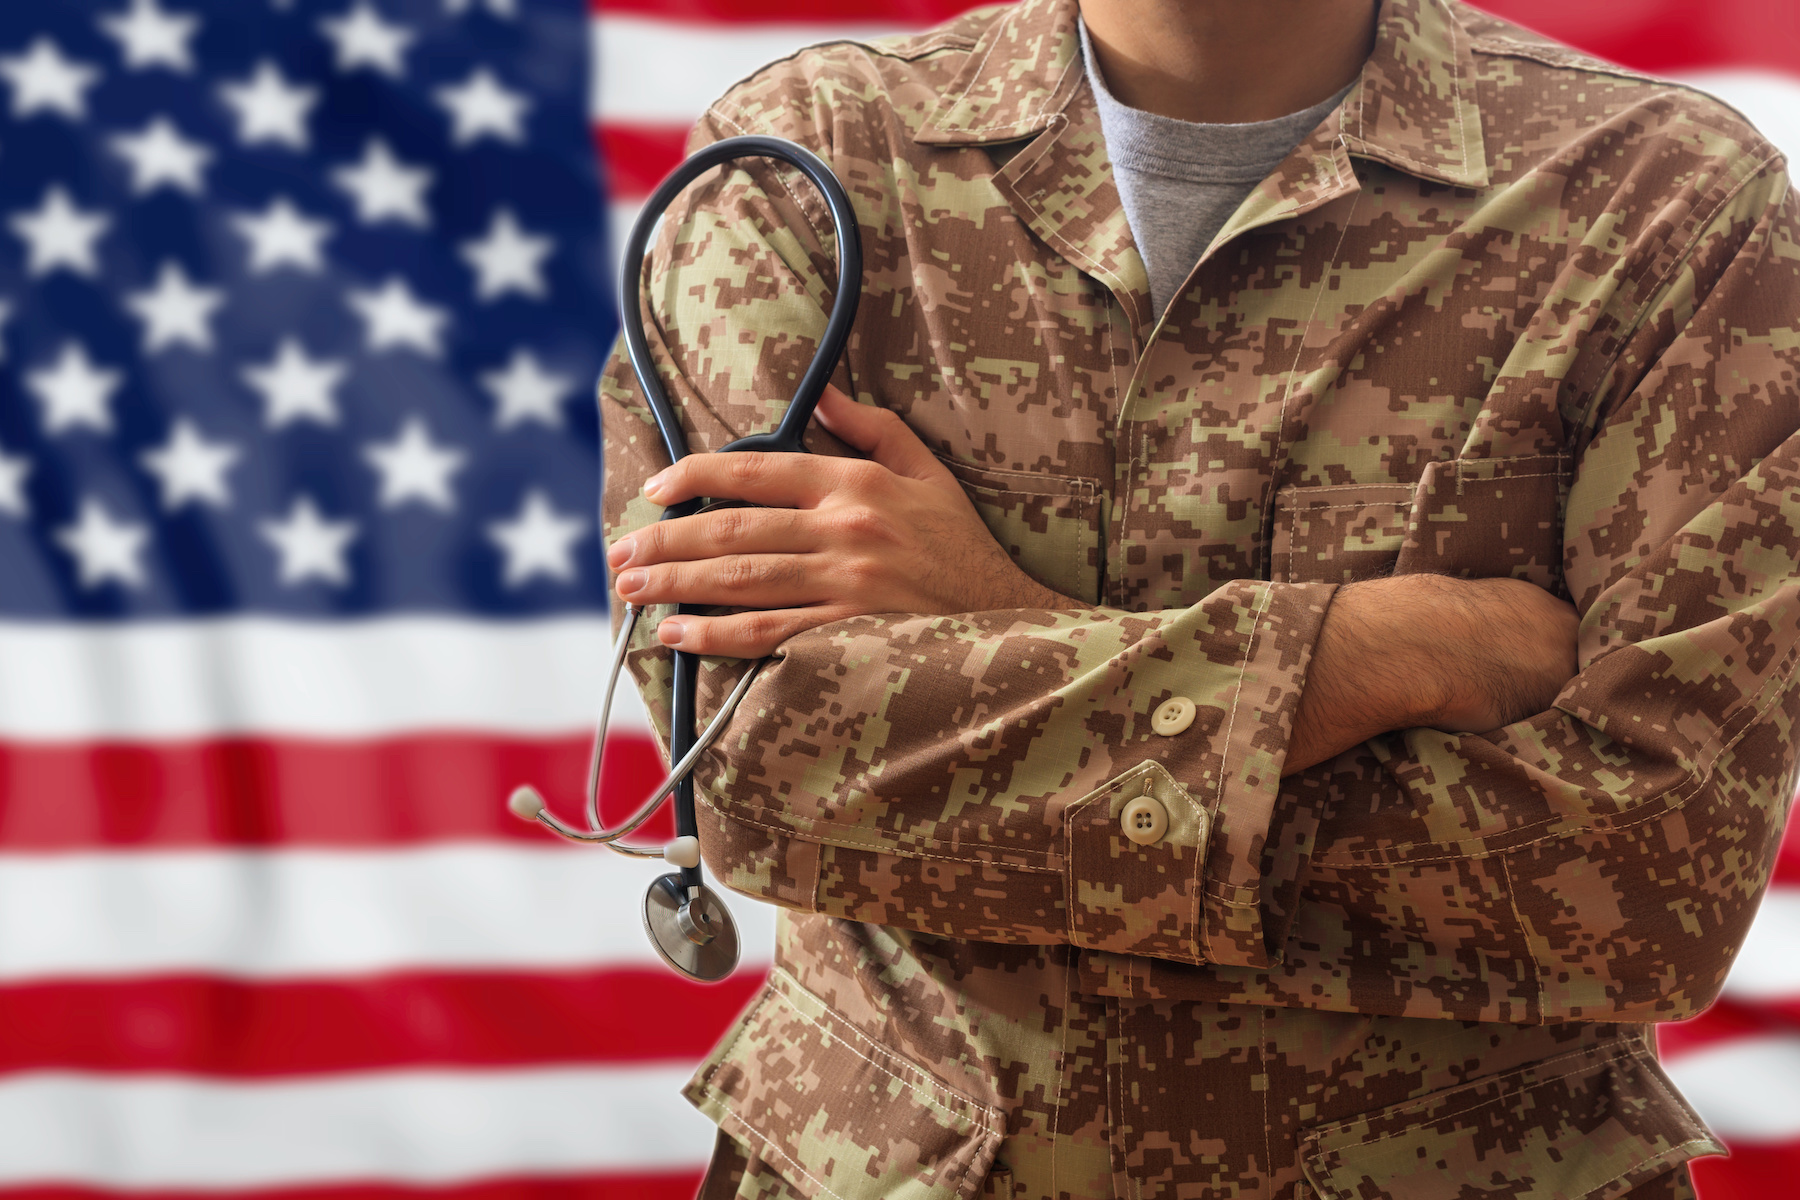 Be Part of the Future: DevMac 2.0 – A $700 Million Opportunity in Defense Health Technology